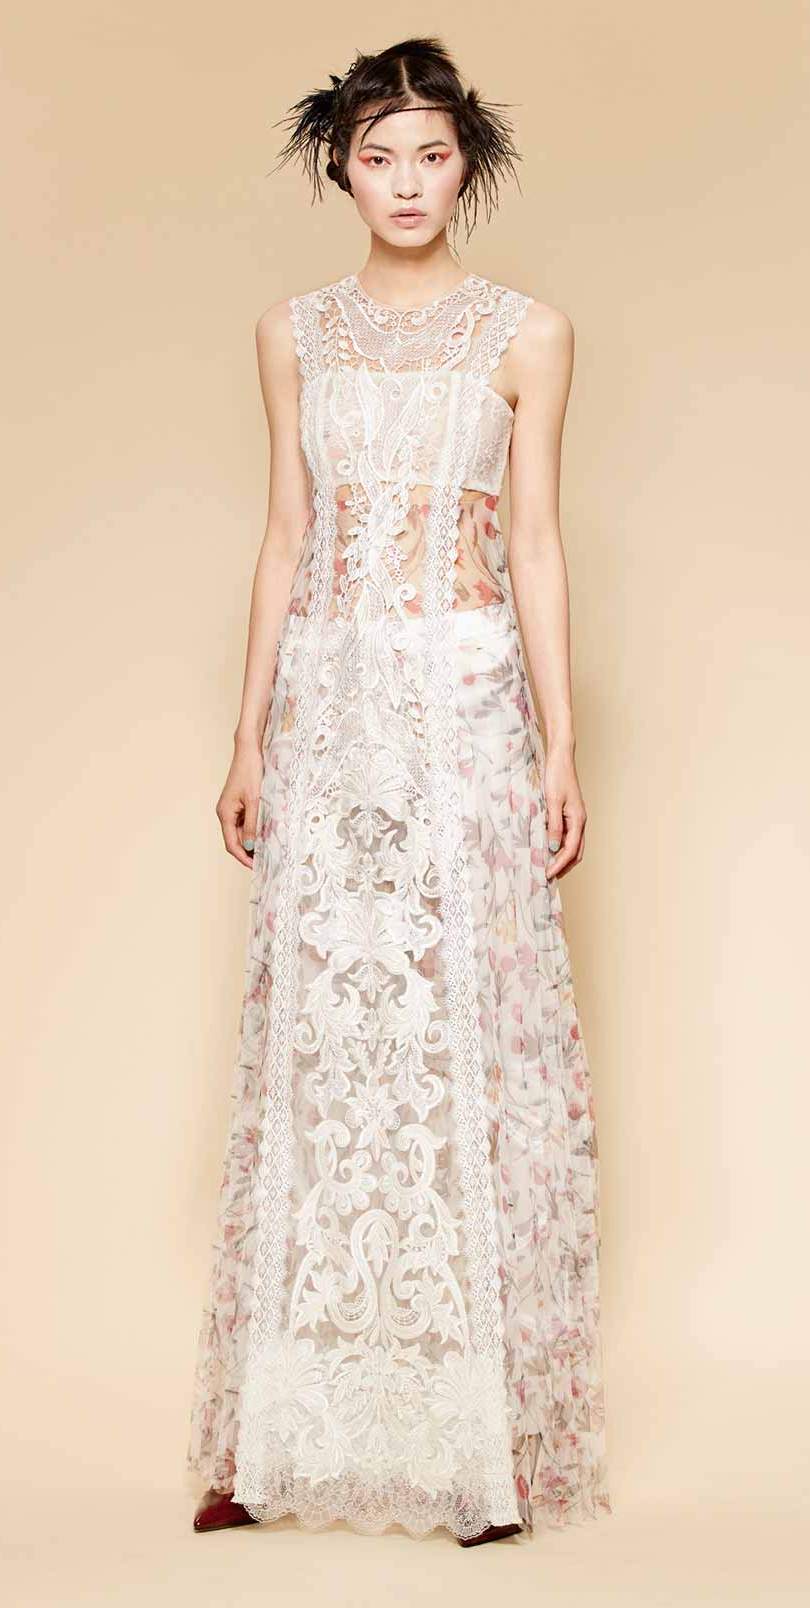 Cut-out dress, made of floral silk embroidery and floral printed tulle in the skirt